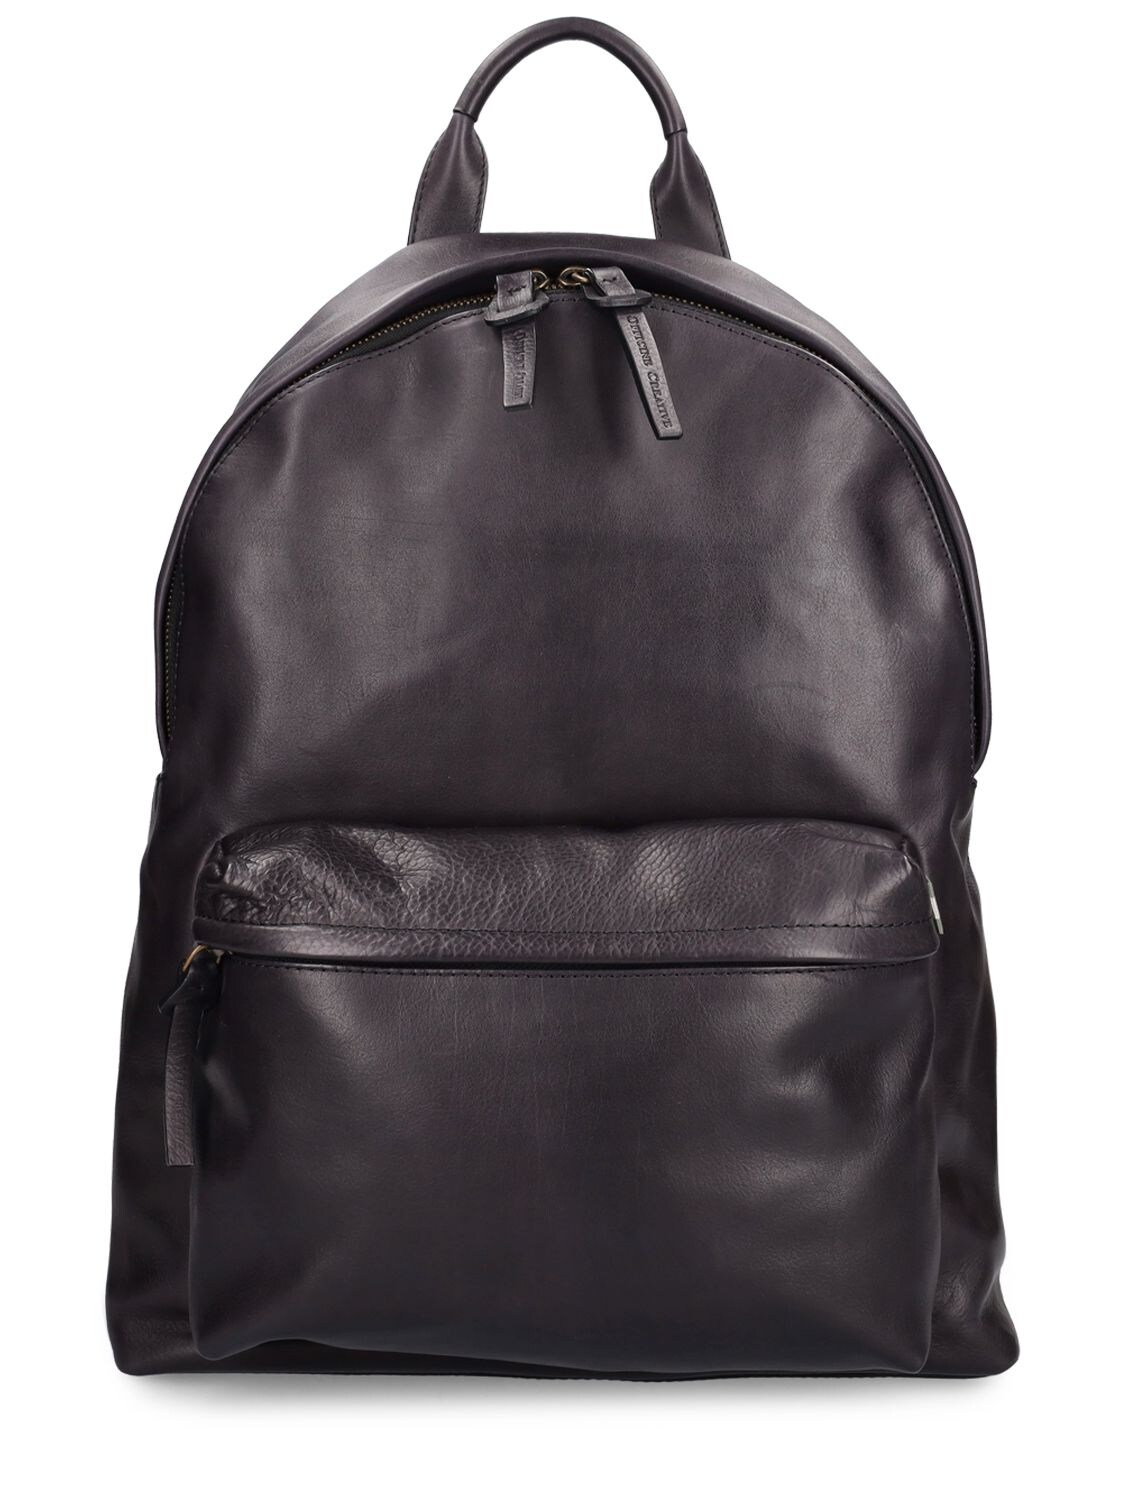 OFFICINE CREATIVE Zipped Leather Backpack | Smart Closet